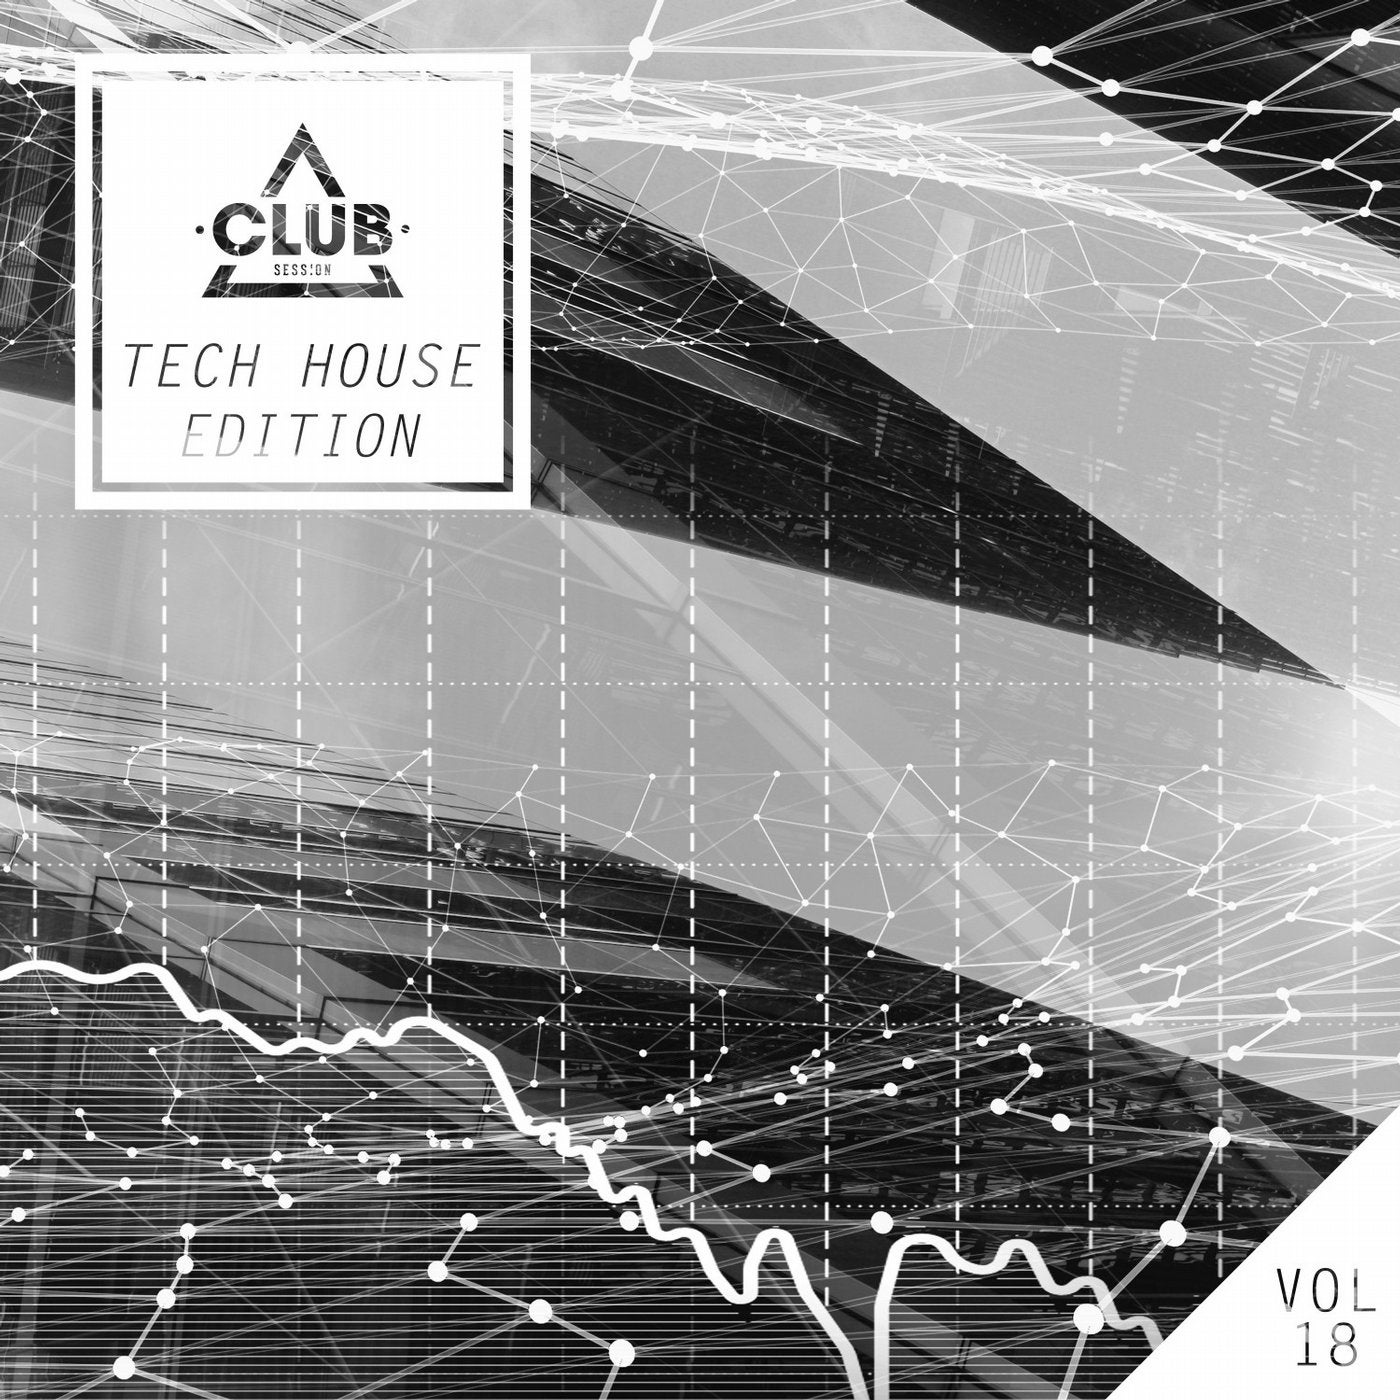 Club Session Tech House Edition Volume 18